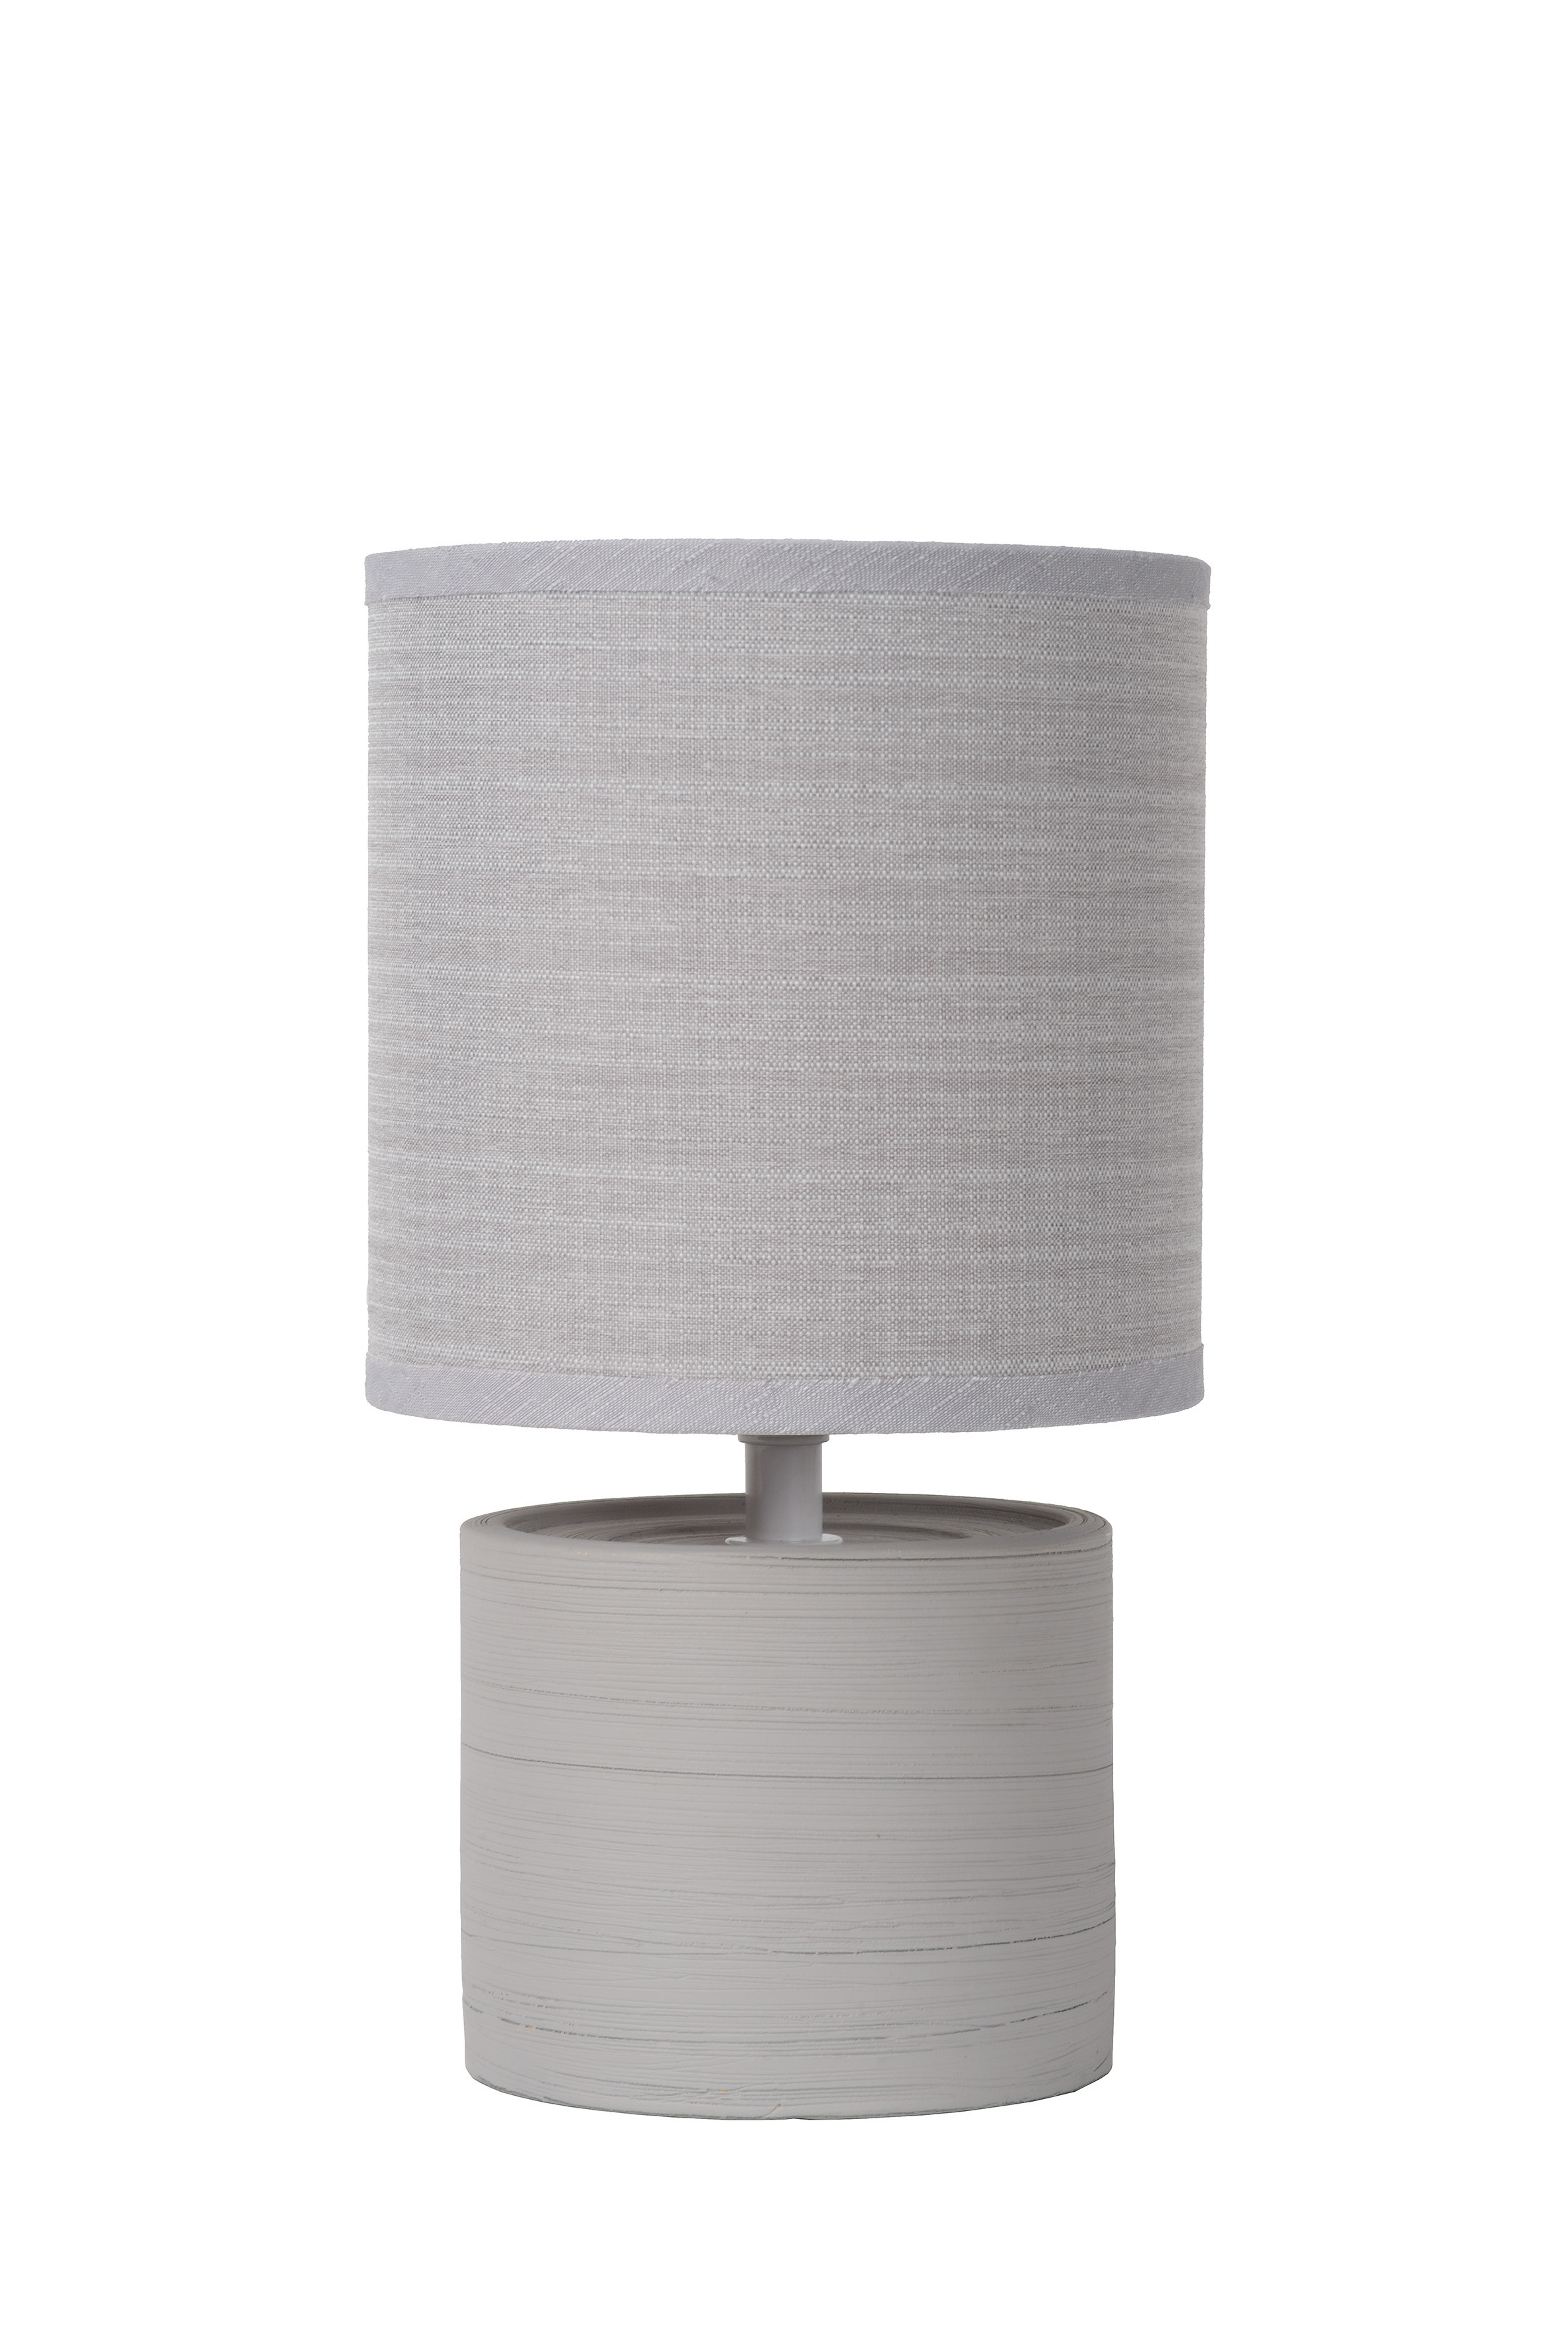 Rent a Table lamp Greasby grey? Rent at KeyPro furniture rental!